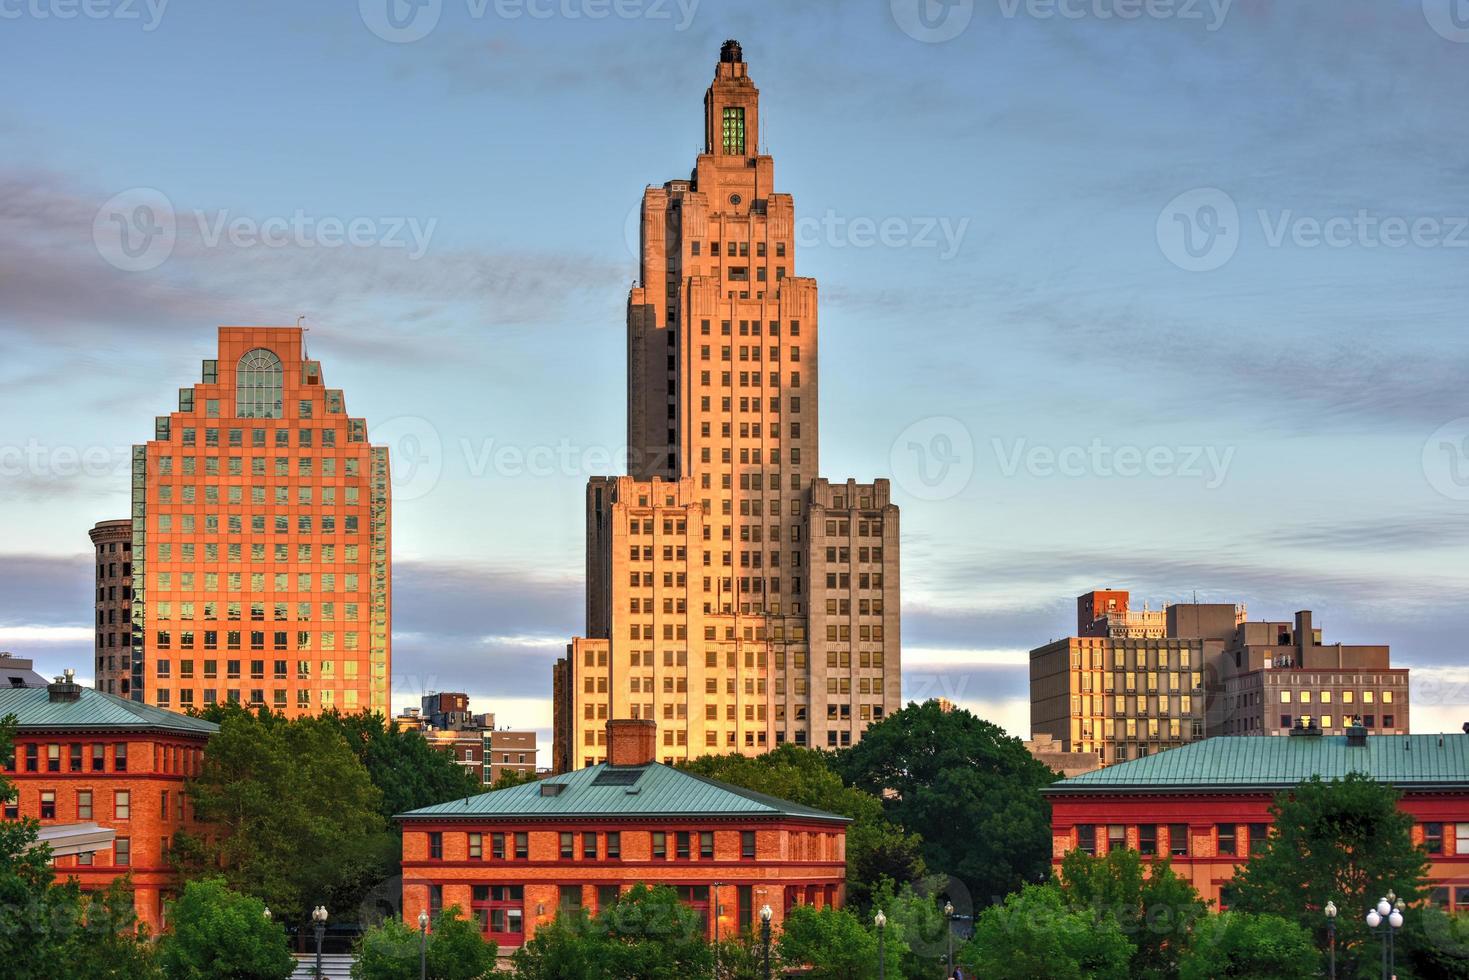 111 Westminster Street in Providence, Rhode Island at sunset. At 428 ft it is the tallest building in Providence. photo